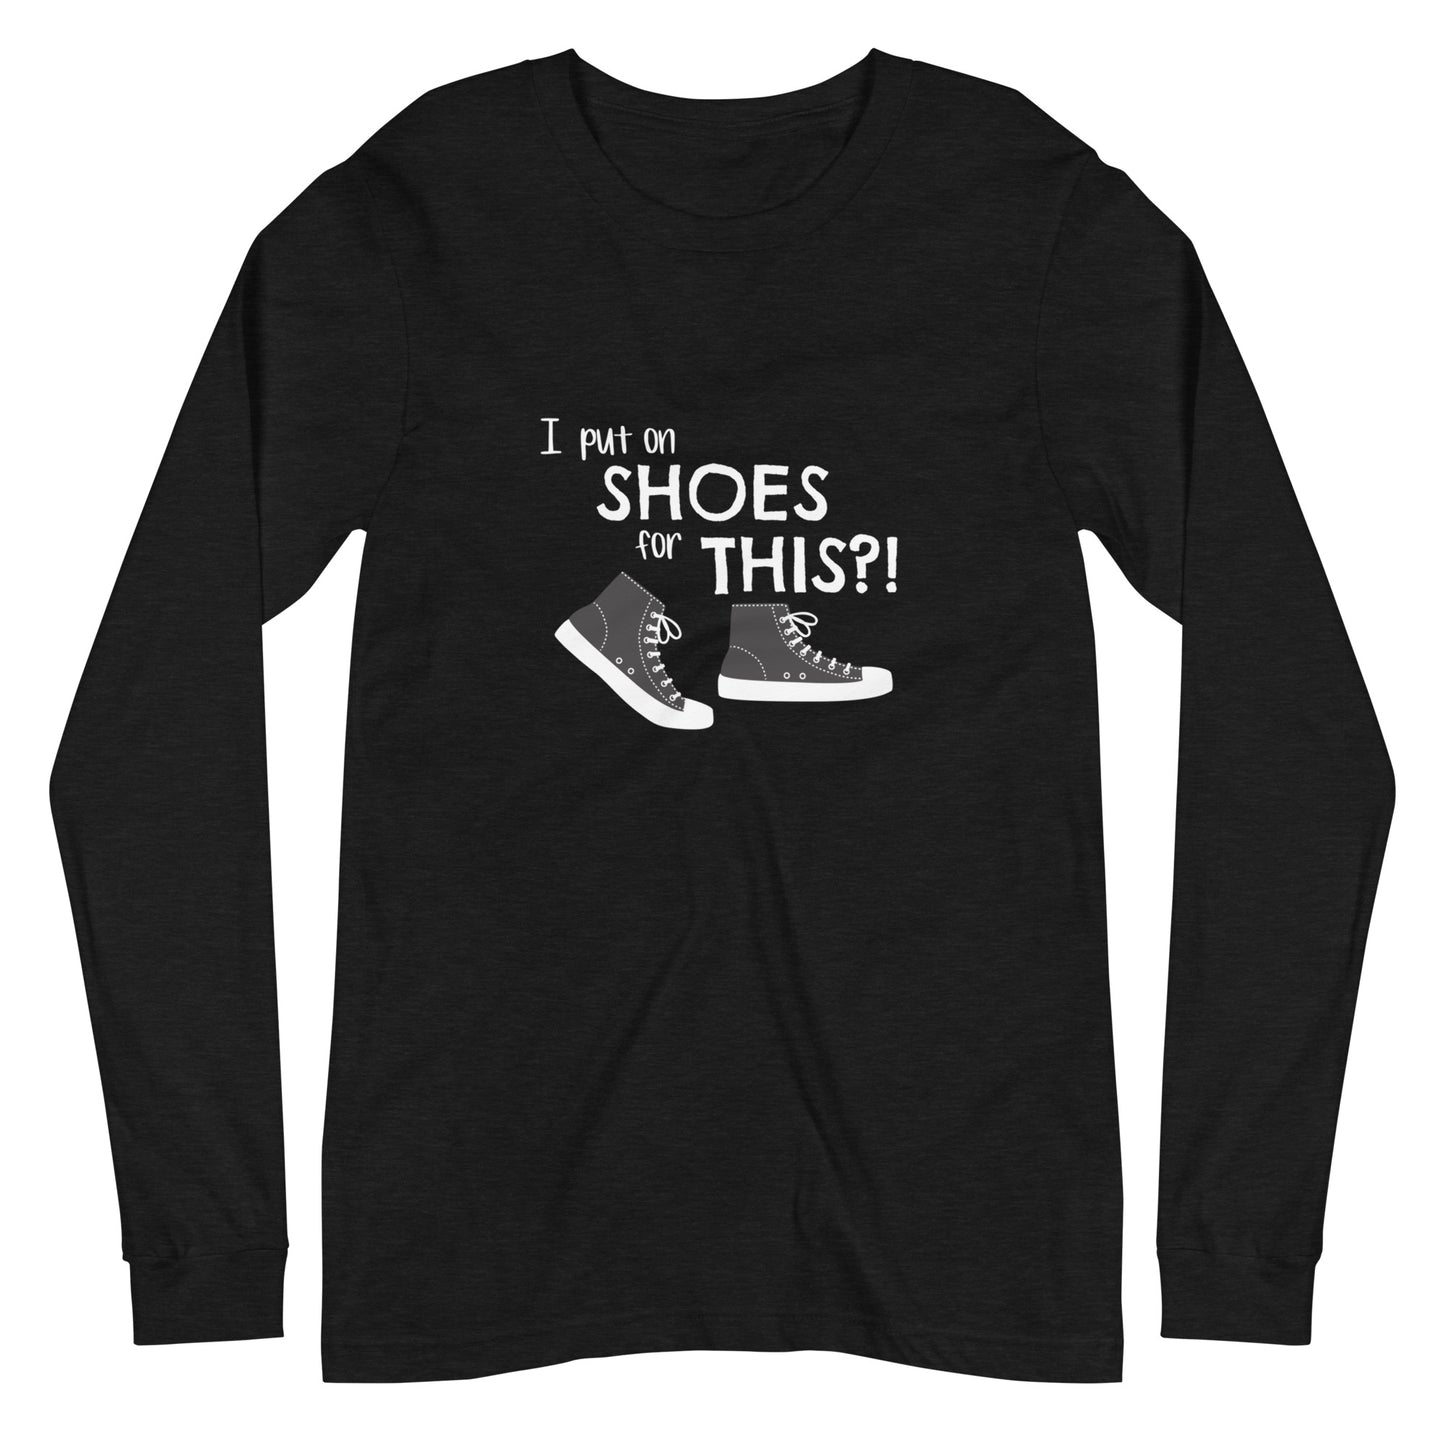 Black Heather long-sleeve t-shirt with graphic of black and white canvas "chuck" sneakers and text: "I put on SHOES for THIS?!"